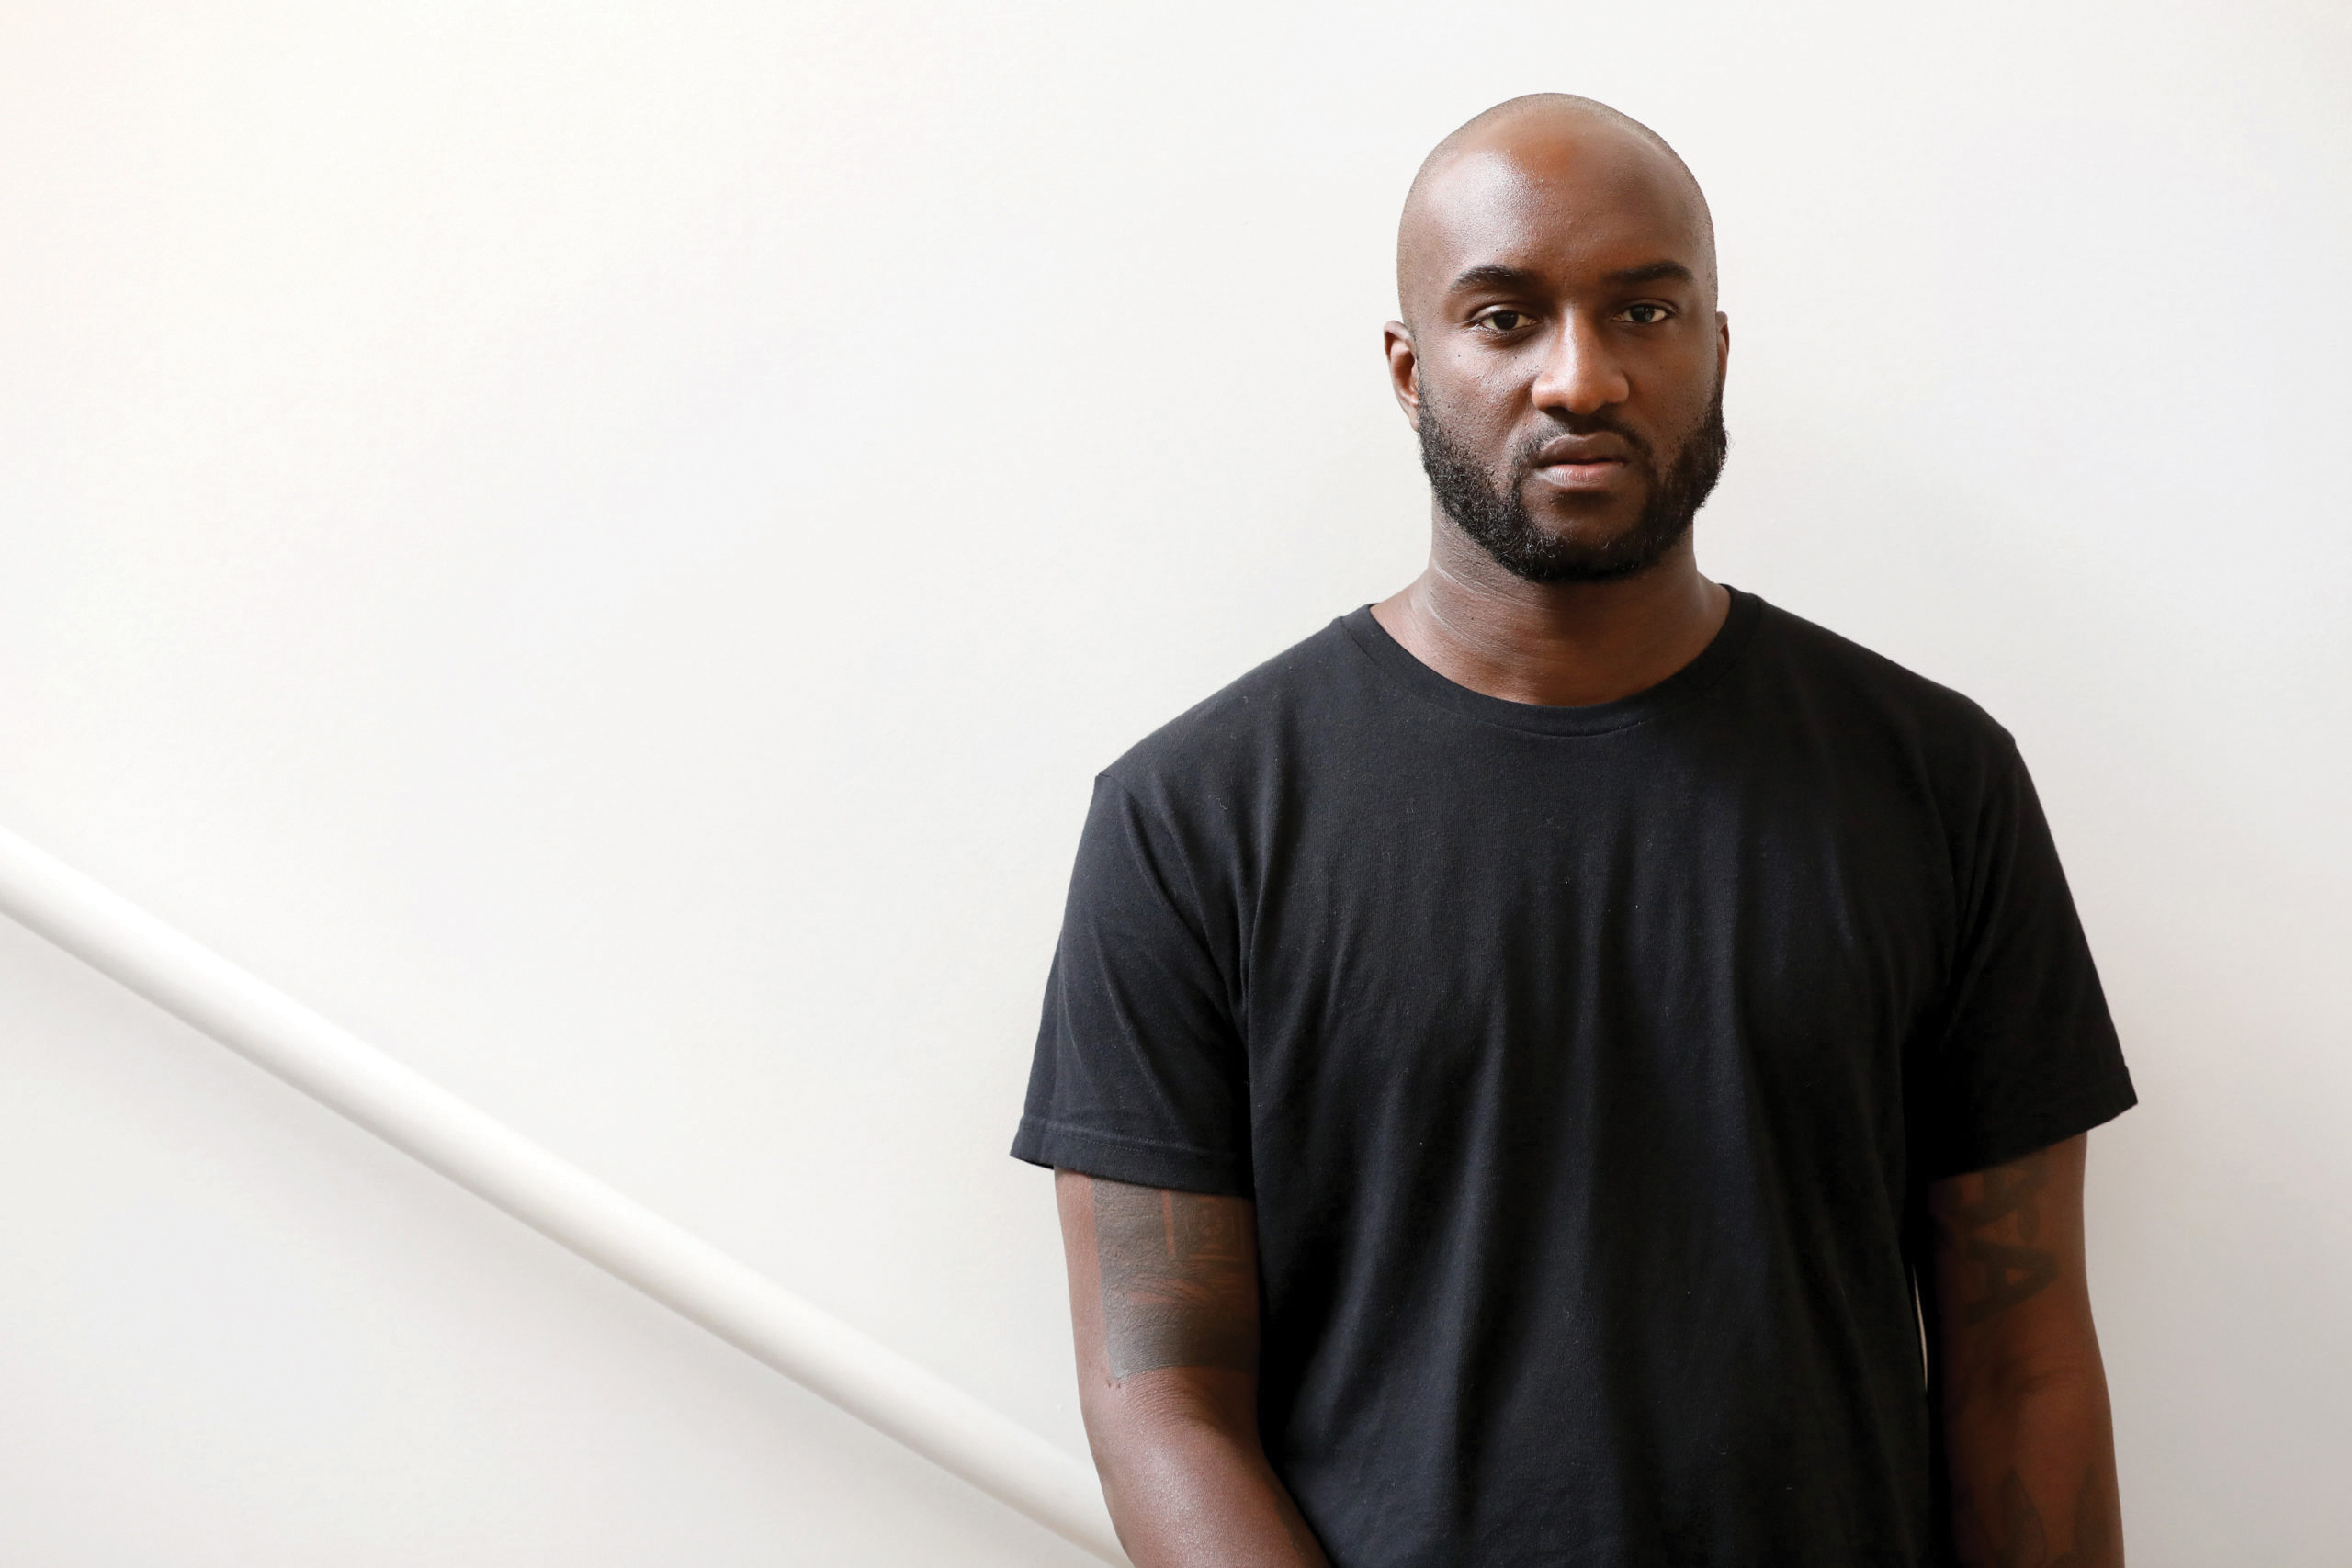 Clothier Virgil Abloh dies of most cancers at 41 | Richmond Completely free Press